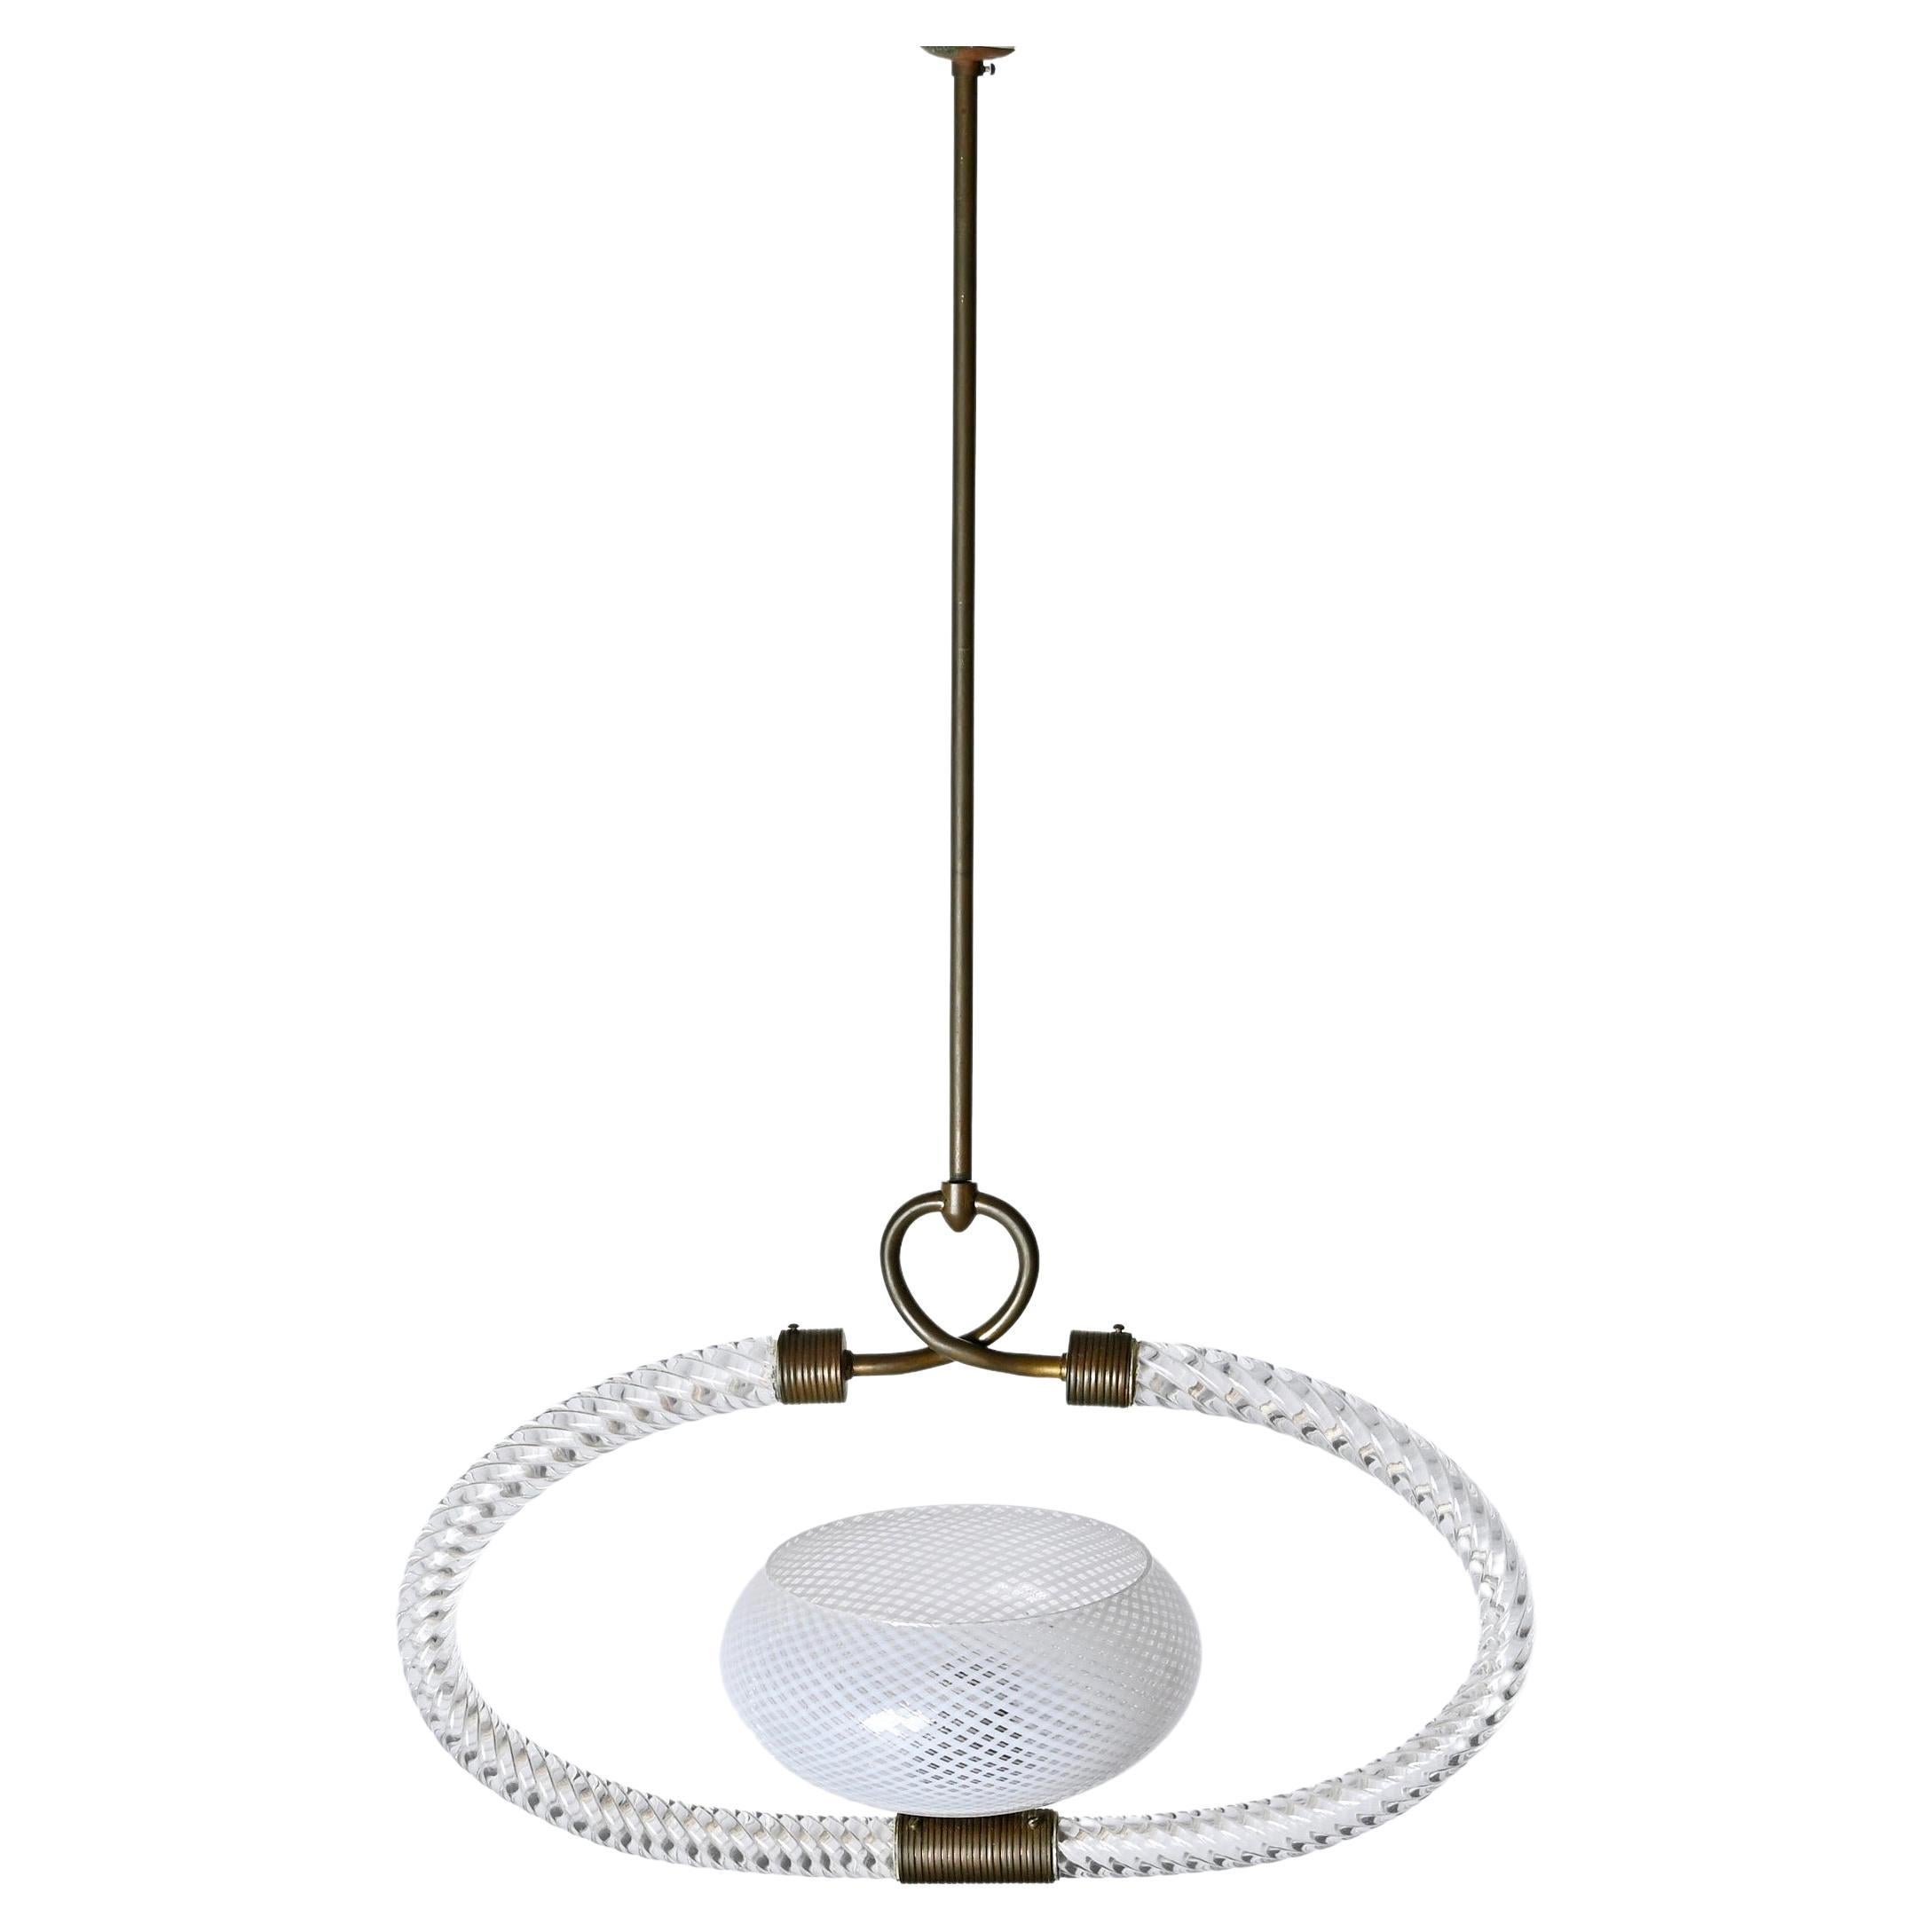 Superb Italian chandelier in white reticello Murano glass and brass, this rare piece was designed in the style of Venini in Italy in the 1940s. 

This finely crafted chandelier is fully made in Murano glass. The central shade is made in 